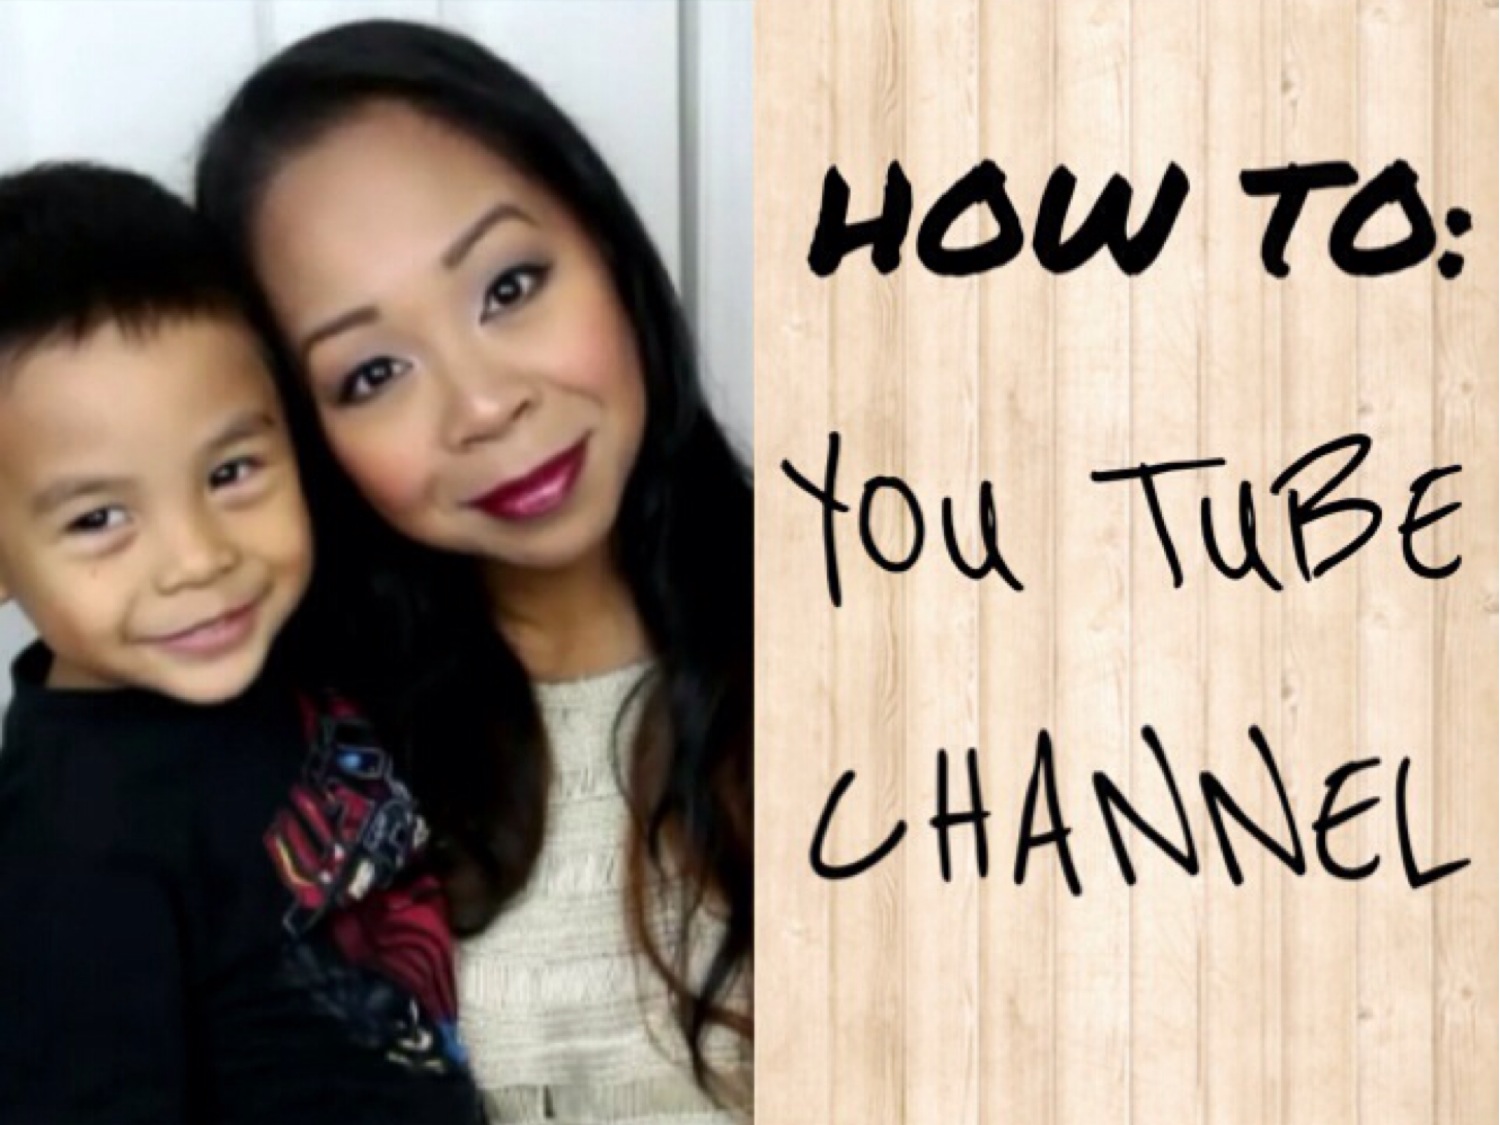 232. how to YT channel